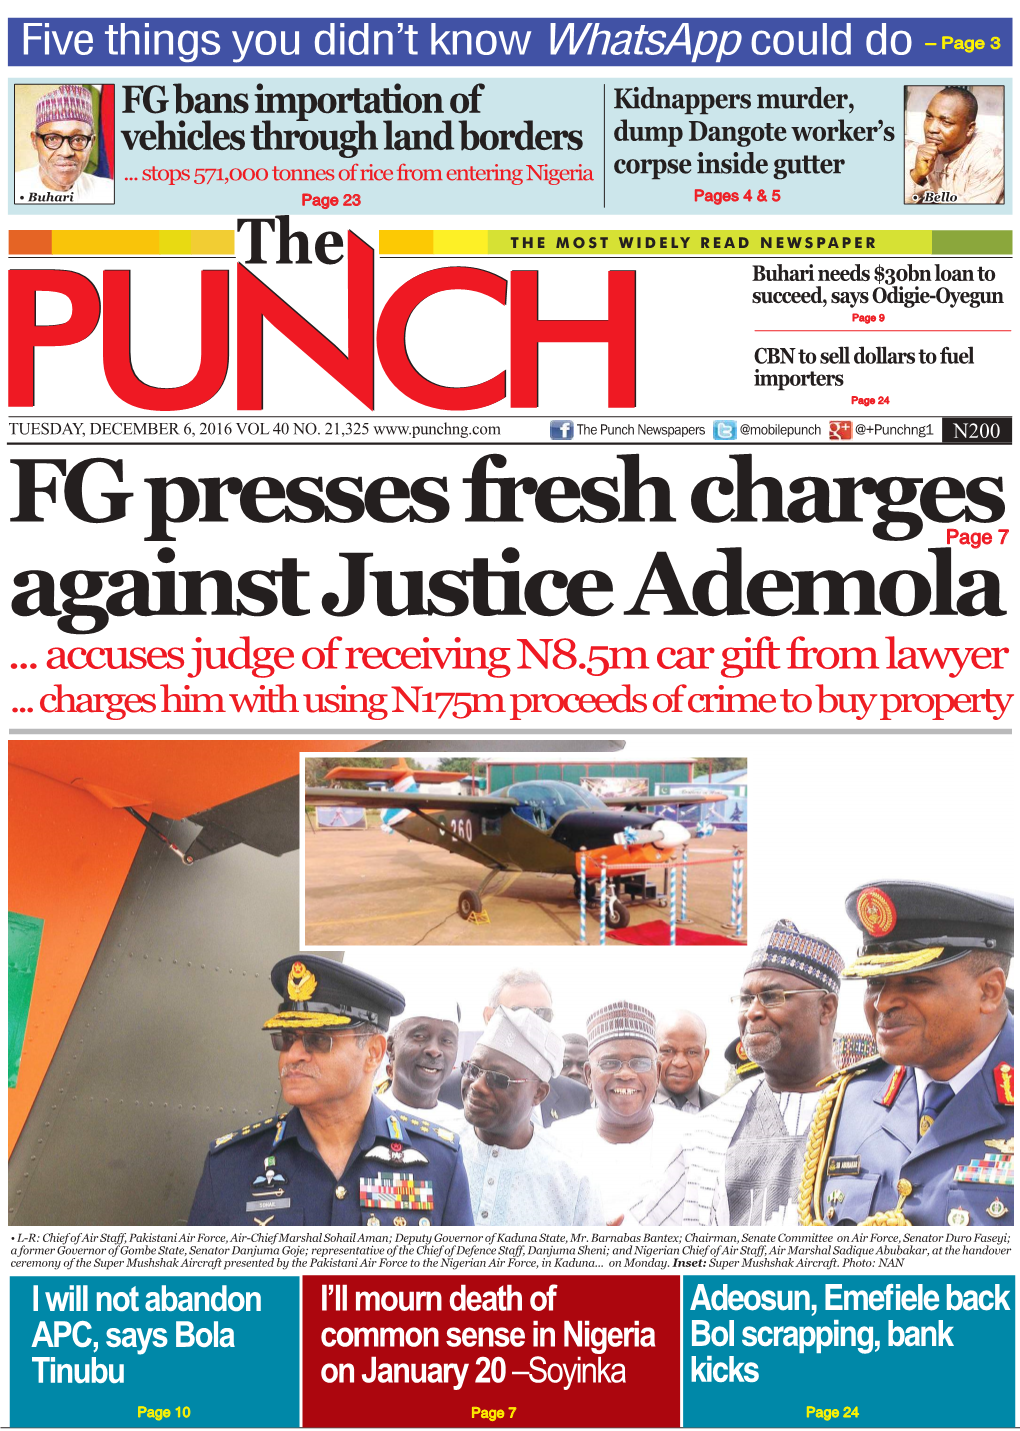 FG Presses Fresh Charges Against Justice Ademolapage 7